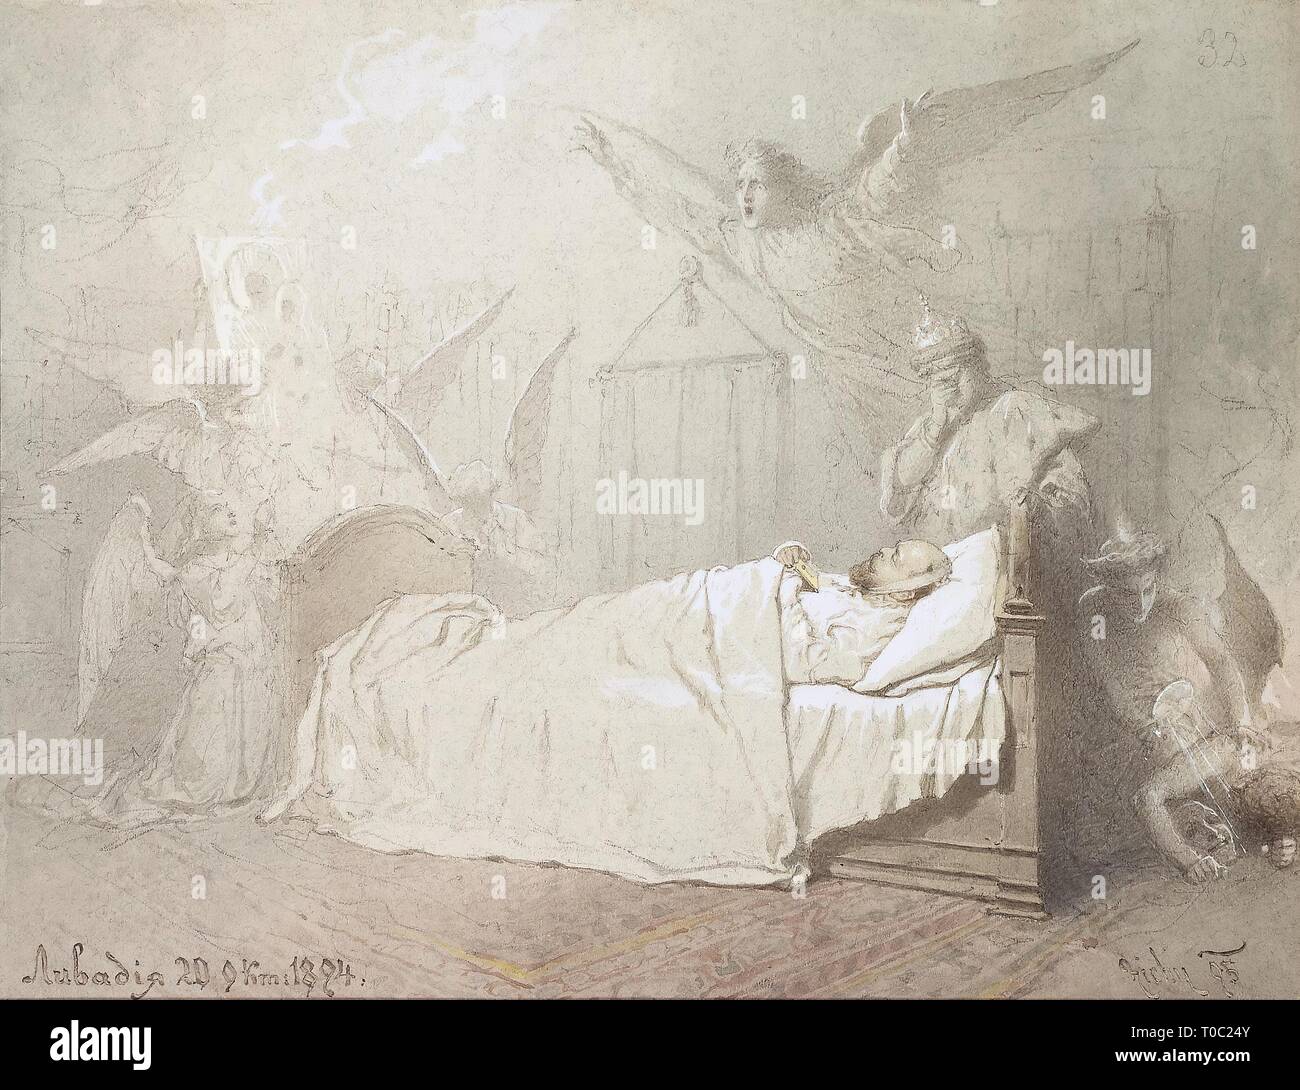 'Alexander III on his Deathbed Surrounded by Angels with a Grieving Youth Symbolizing the Romanov Dynasty'. Series 'Death of Alexander III in Livadia'. Russia, 1895. Dimensions: 23,5x31 cm. Museum: State Hermitage, St. Petersburg. Author: MIHALY VON ZICHY . MIHALY ZICHY. Stock Photo